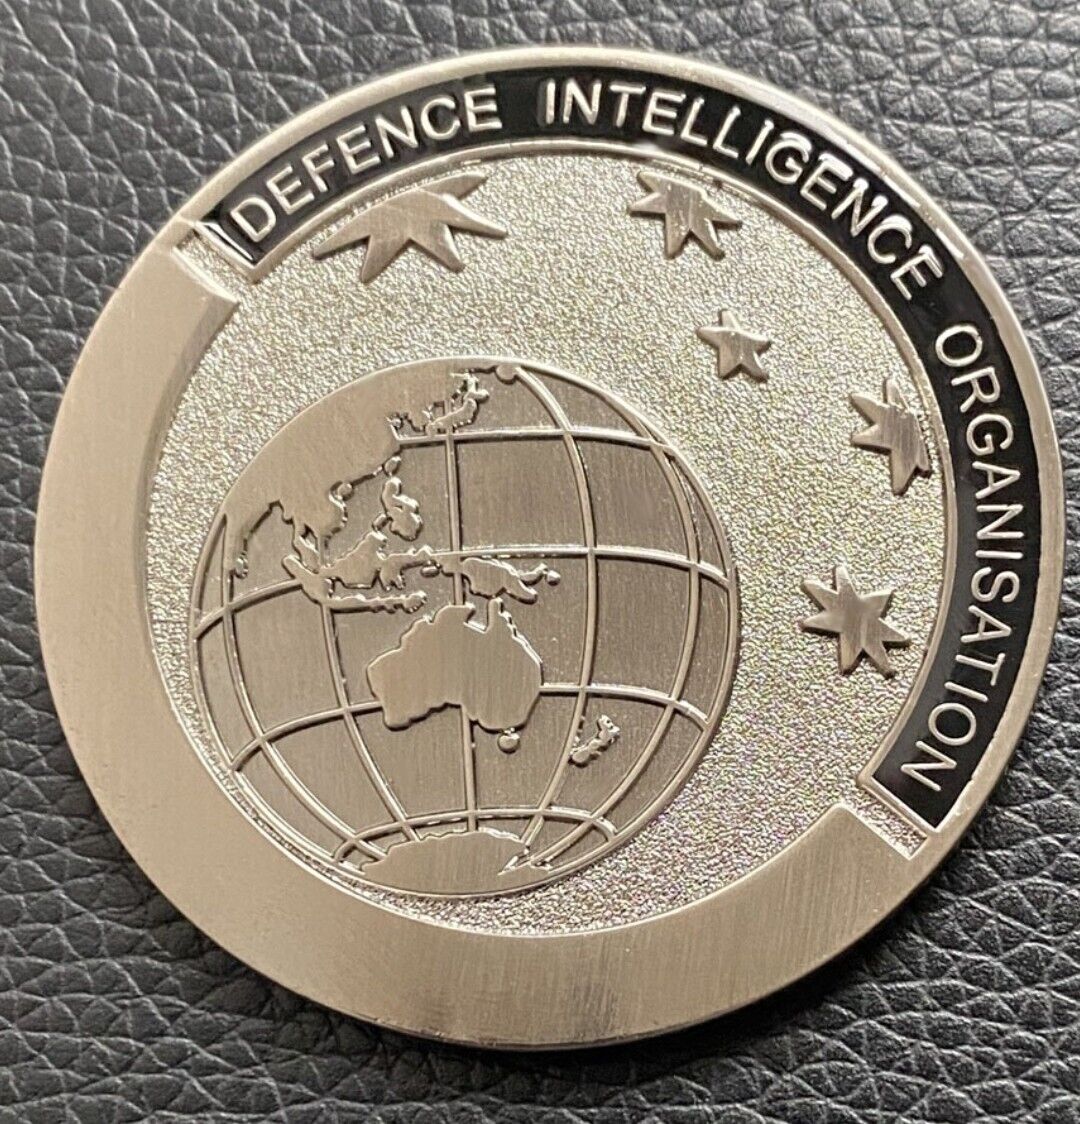 Defence Intelligence Organisation Australia Commonwealth federal) Coin Not badge